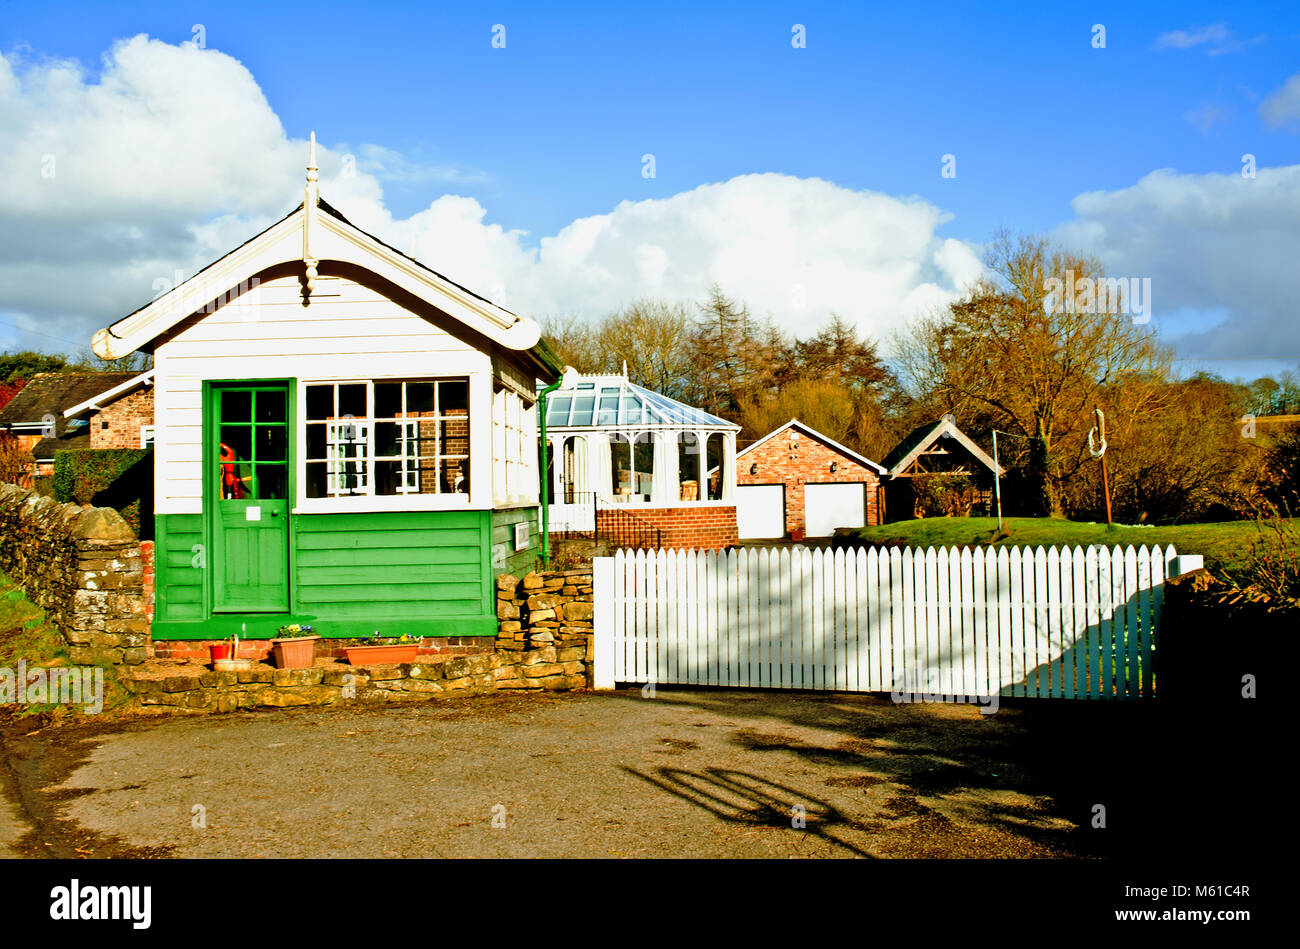 Coxwold closed railway station and signalbox, Coxwold, North Yorkshire Stock Photo